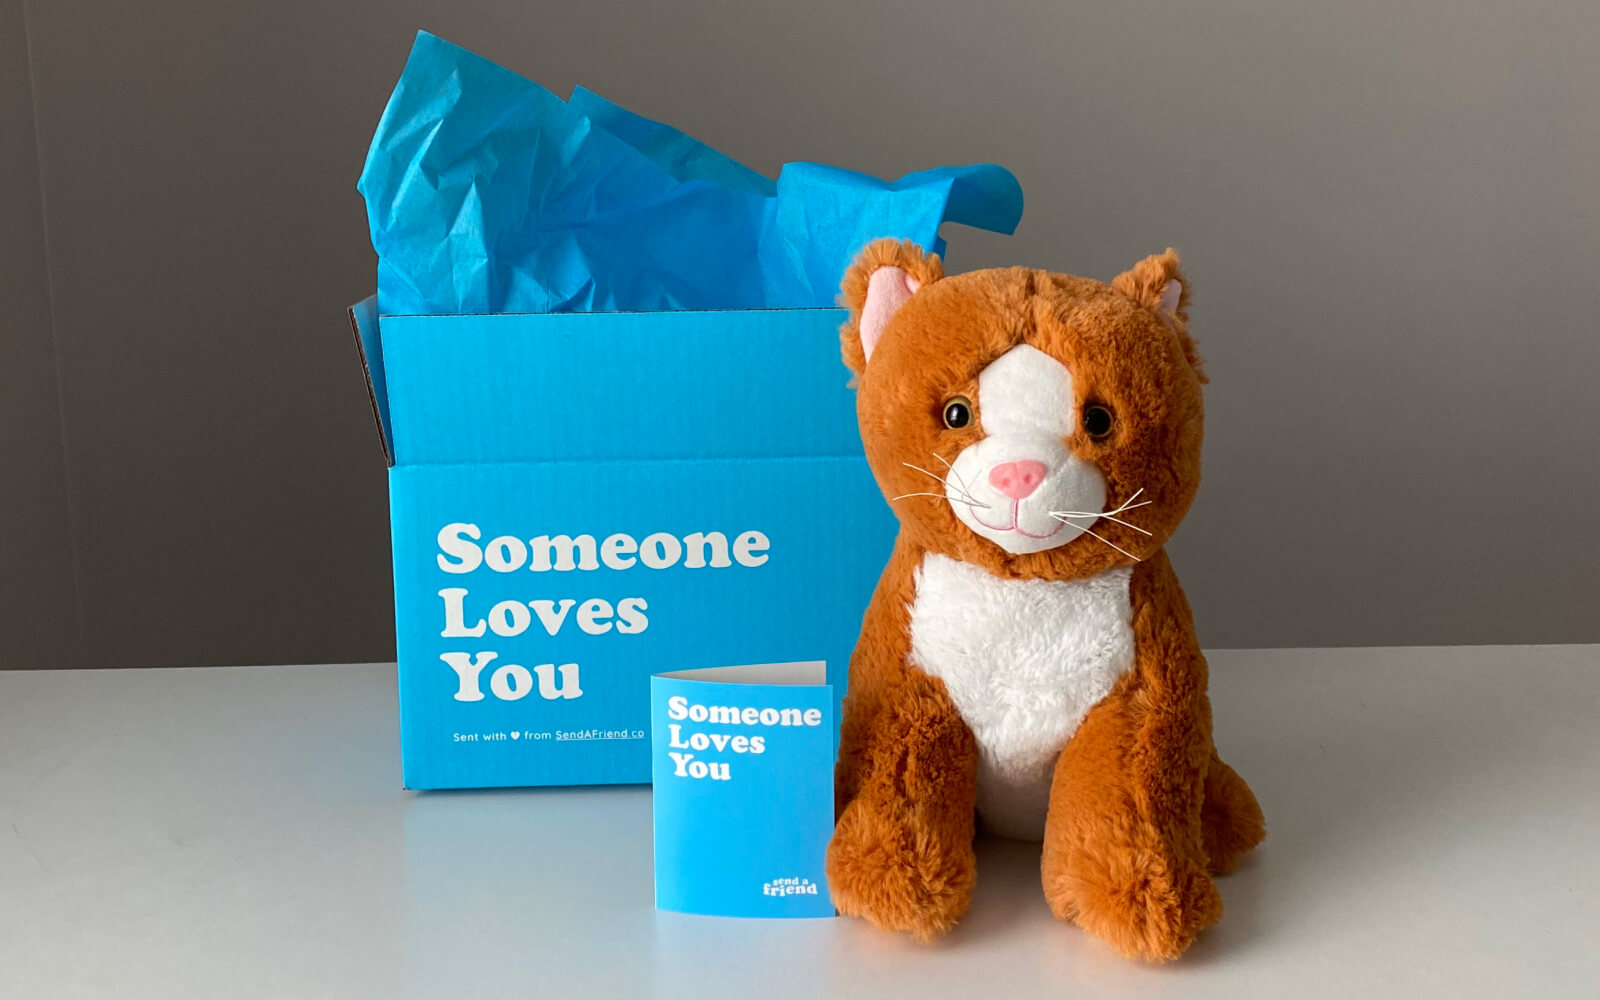 orange and white stuffed animal cat next to notecard and blue "someone loves you" box